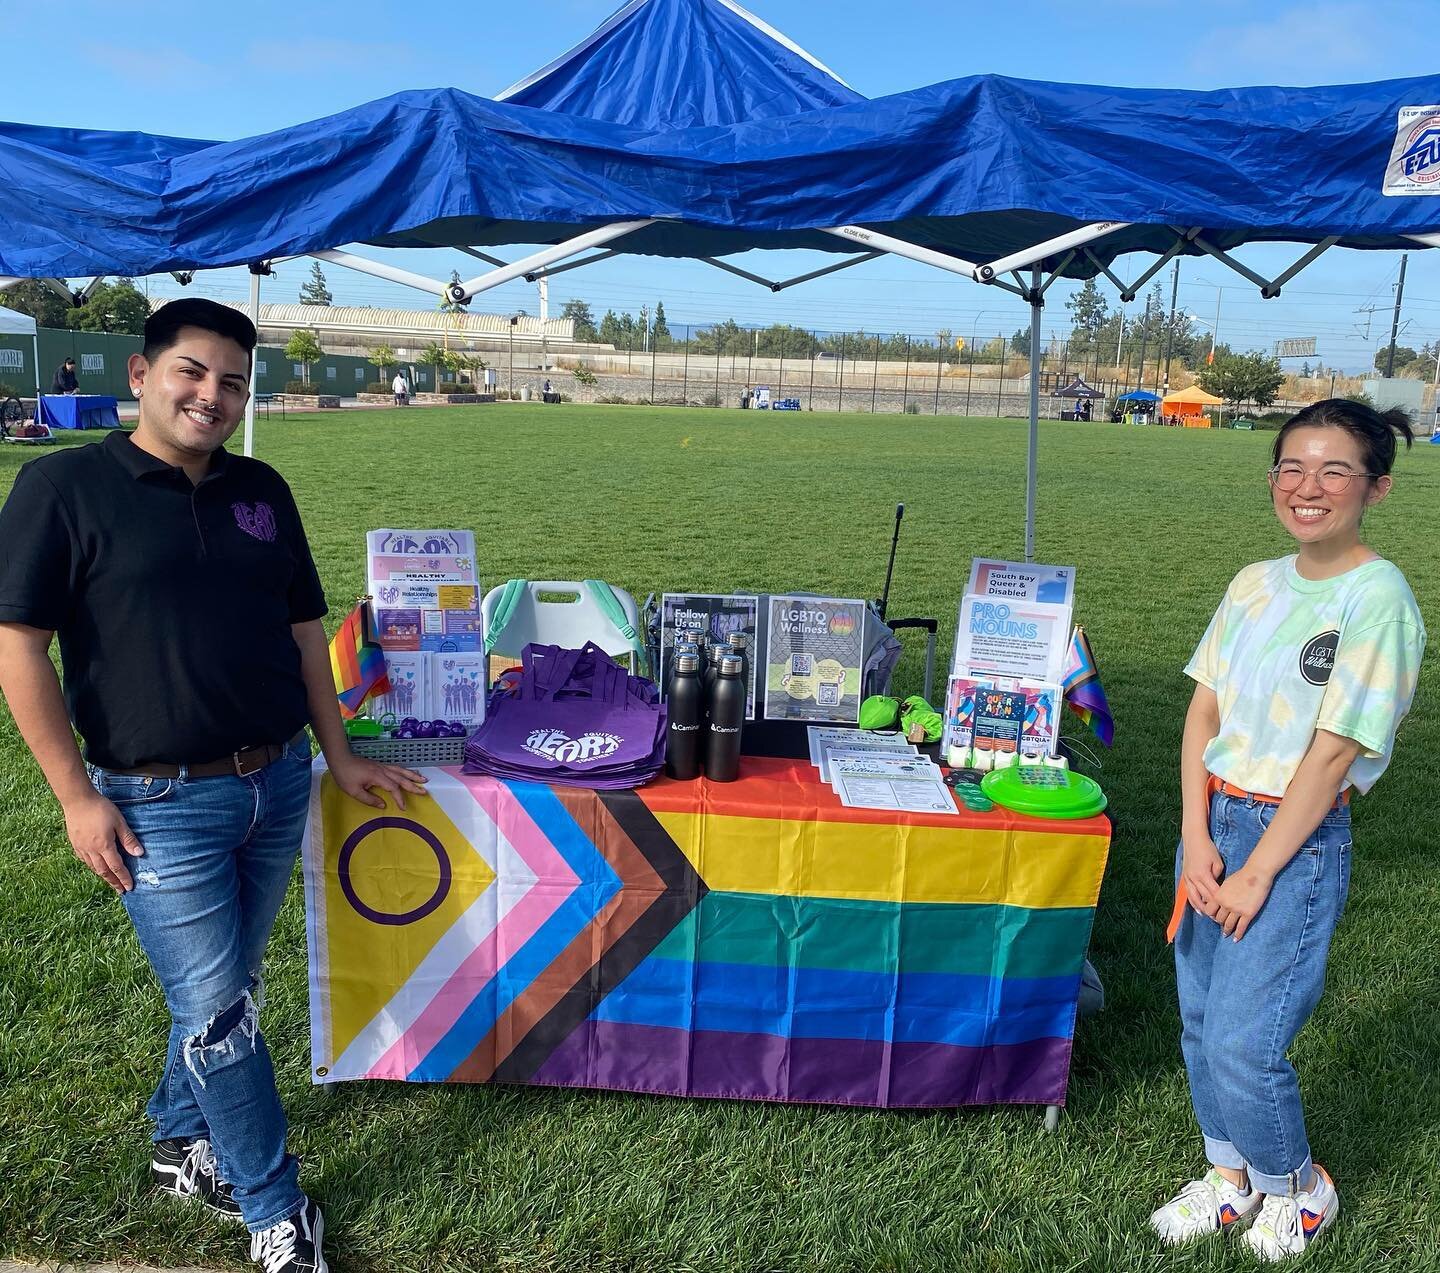 We and @heartprogramsantaclaracounty had a meaningful time with community yesterday with @vivacallesj (while also repping @thelgbtqyouthspace!). 

We met so many wonderful community members and supporters, and we are glad to have held space for each 